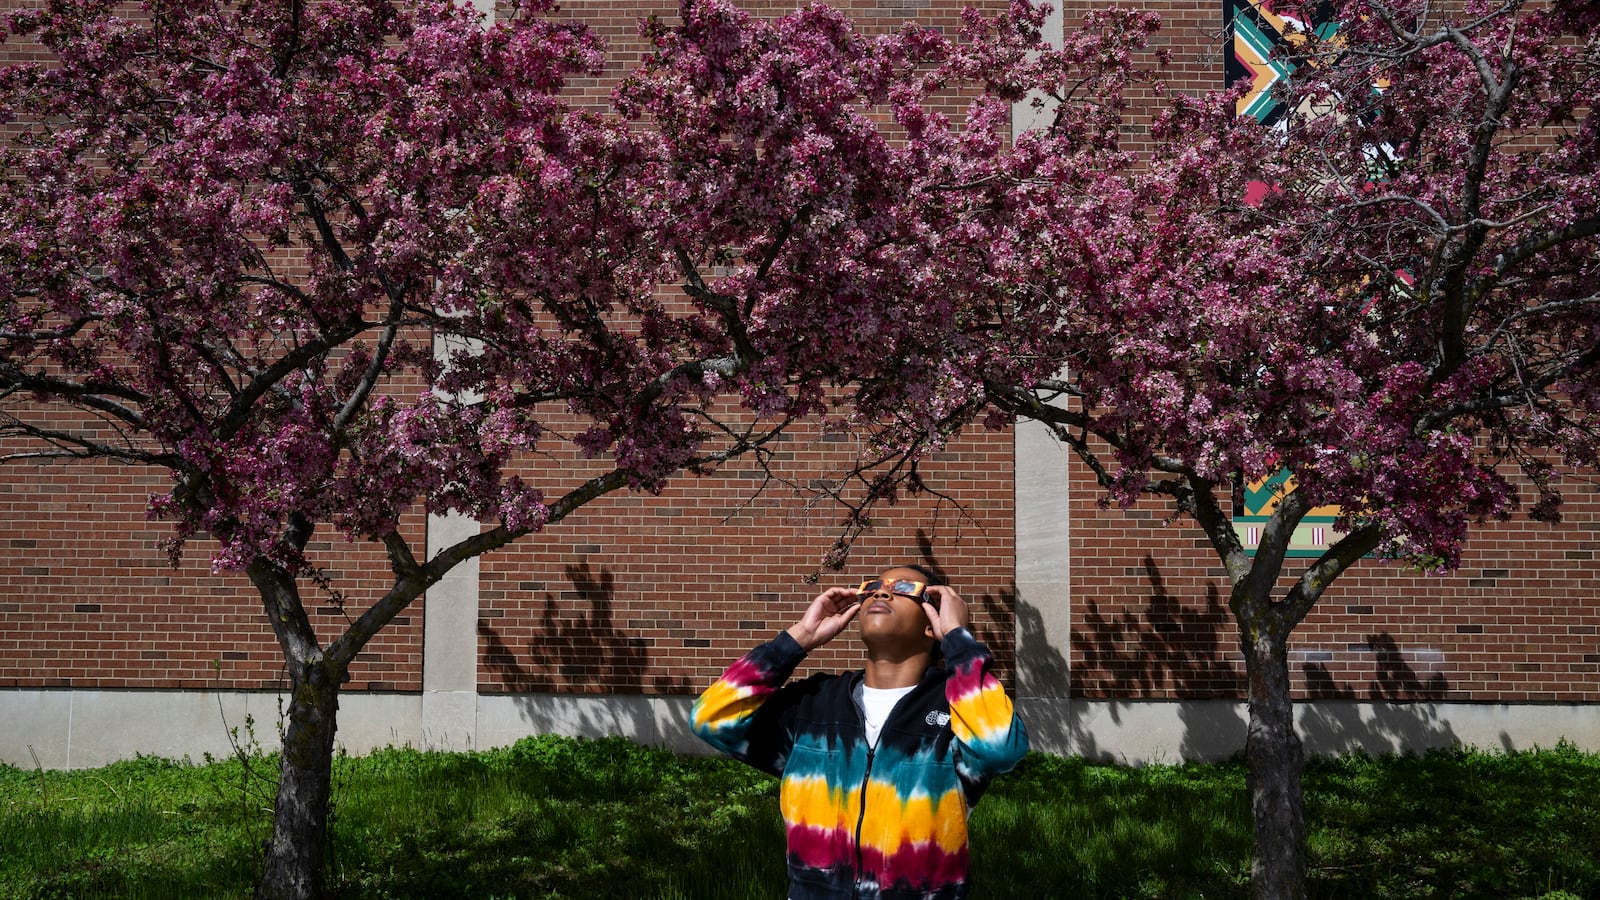 A young student wearing solar eclipse viewing glasses stands in front of two flowering trees and a brick building while looking up at the sky.